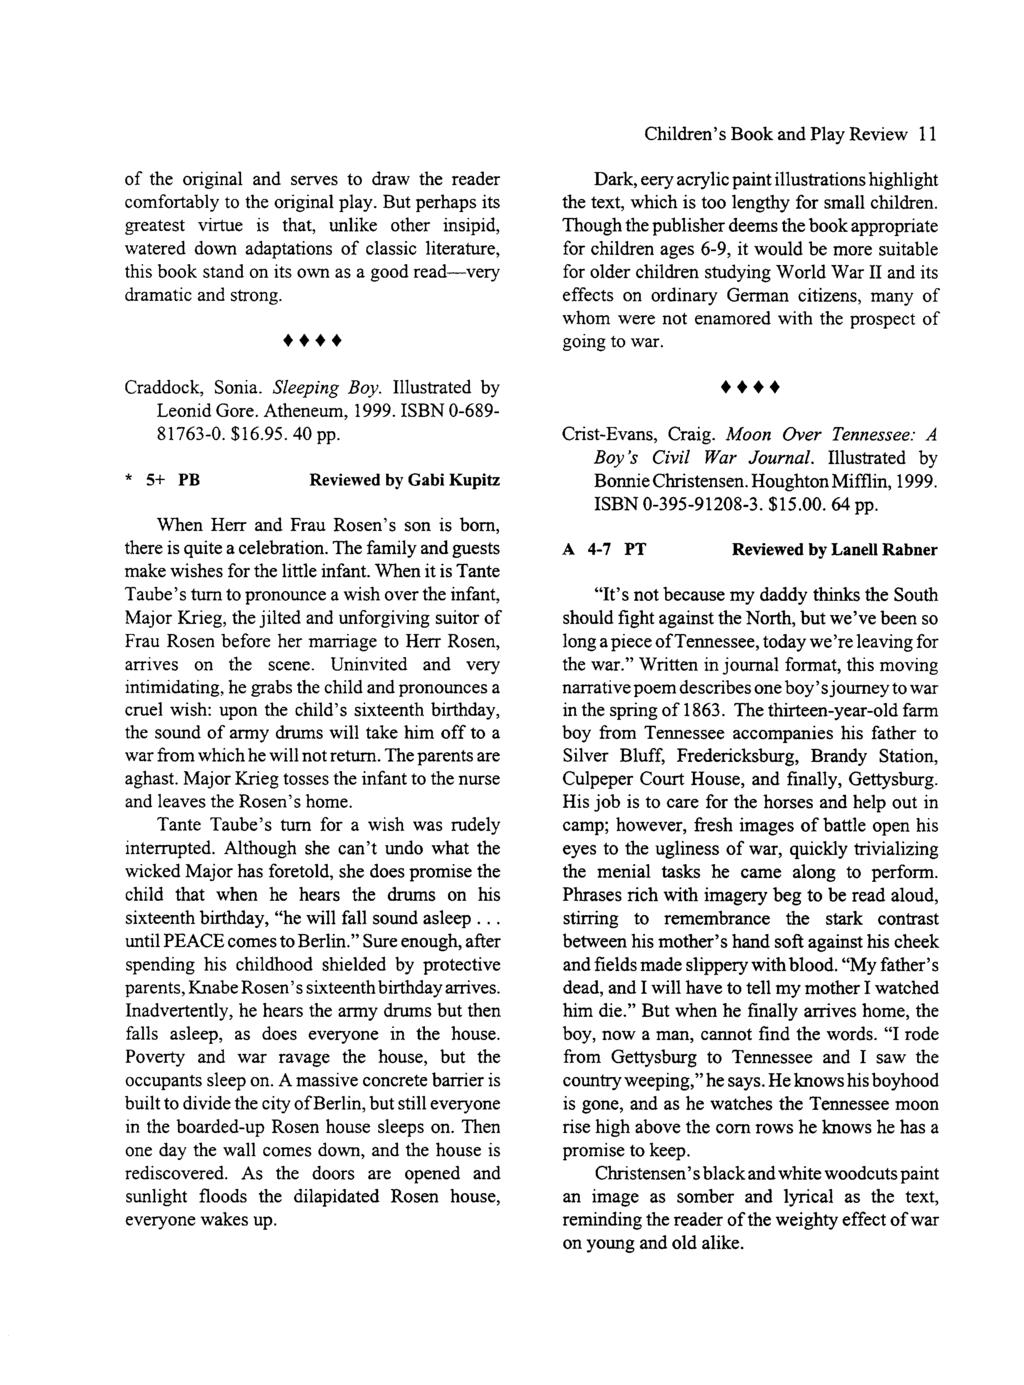 Children's Book and Media Review, Vol. 20 [1999], Iss. 4, Art. 4 Children's Book and Play Review 11 of the original and serves to draw the reader comfortably to the original play.